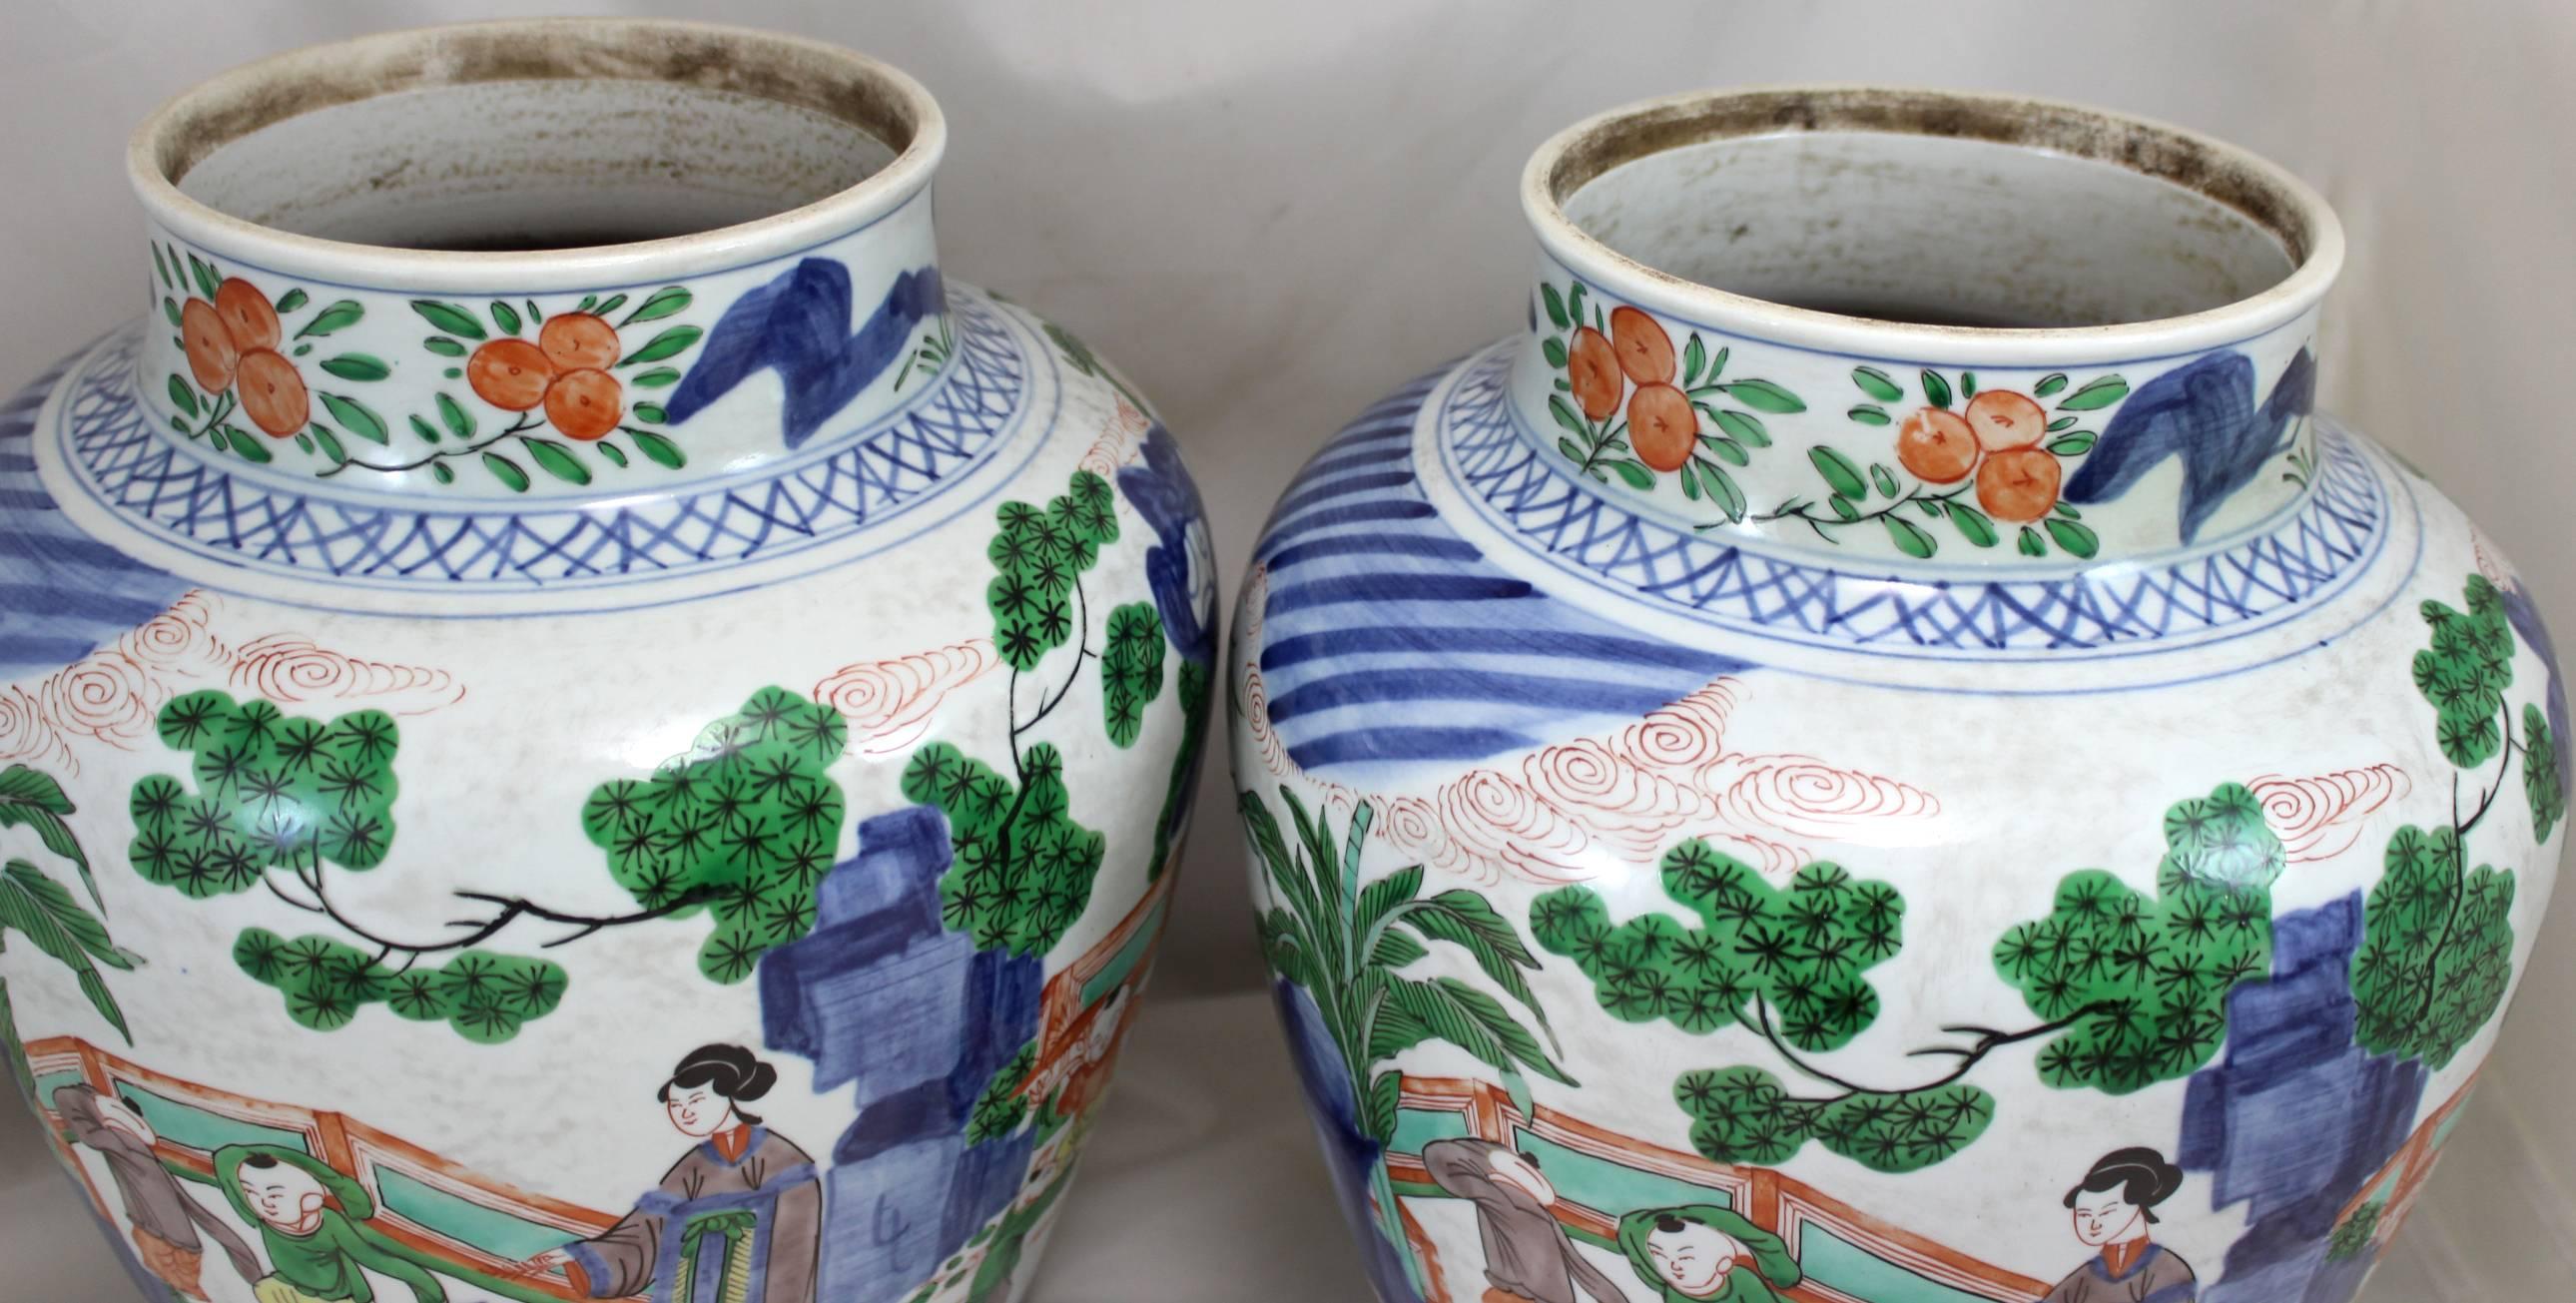 Pair of 19th Century Chinese Qing Dynasty Polychrome Covered Porcelain Jars 1